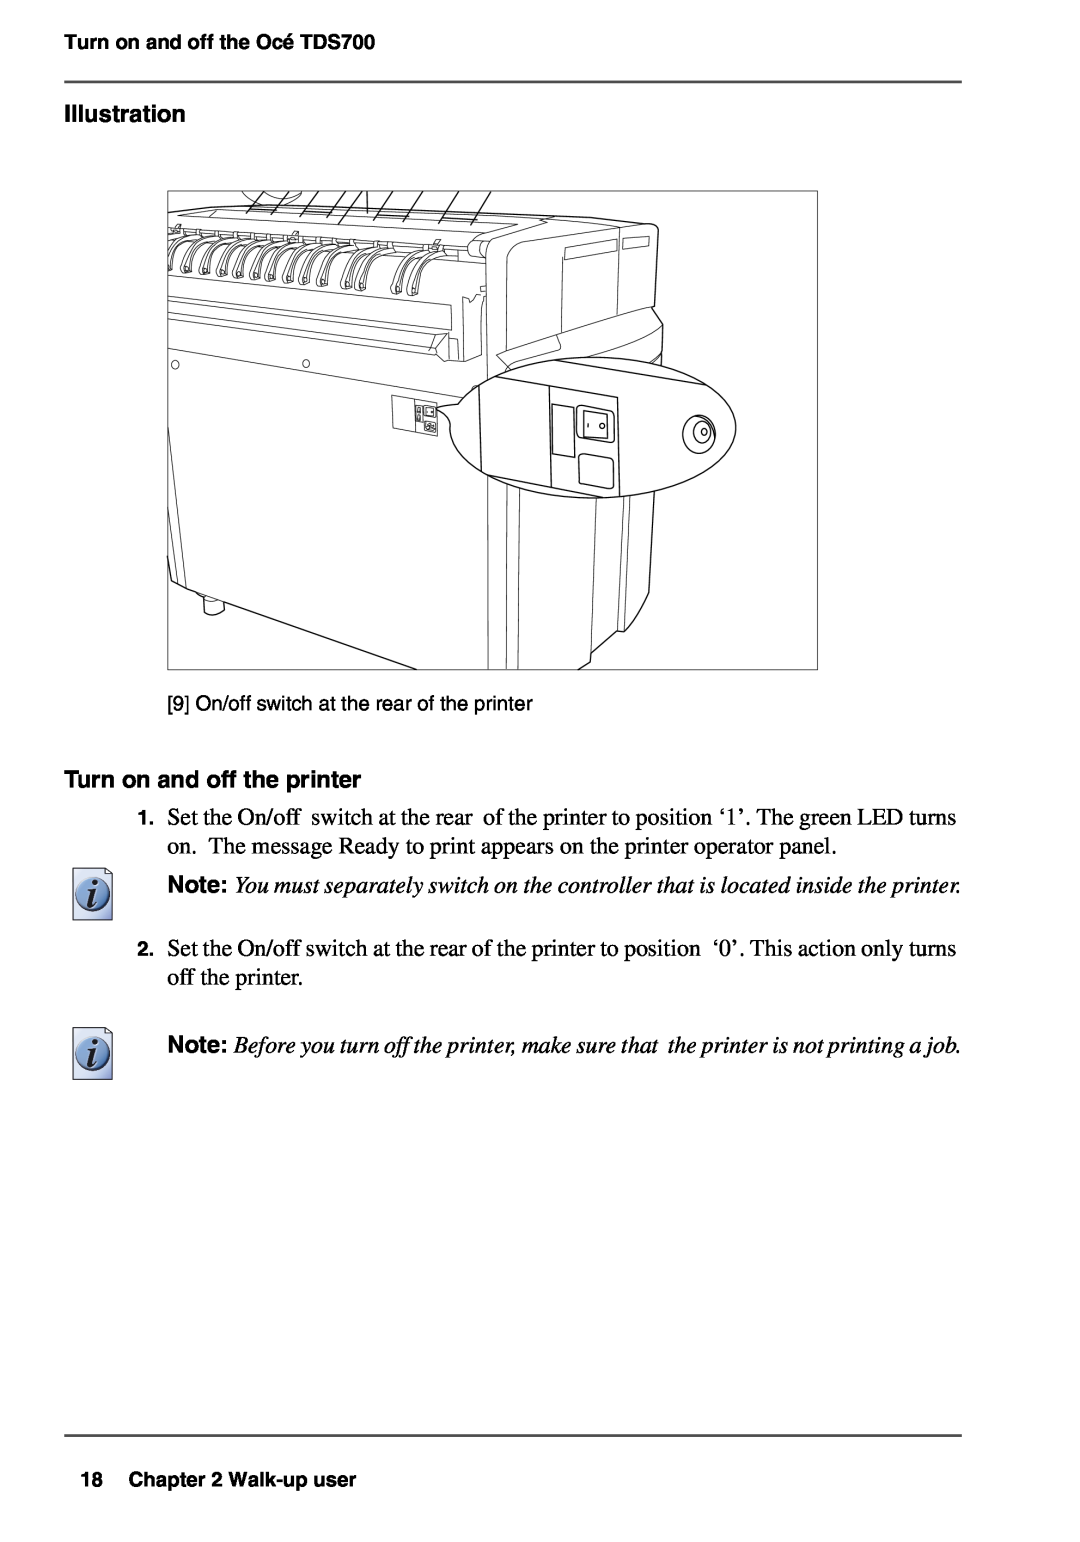 Oce North America TDS700 user manual Turn on and off the printer, Illustration 